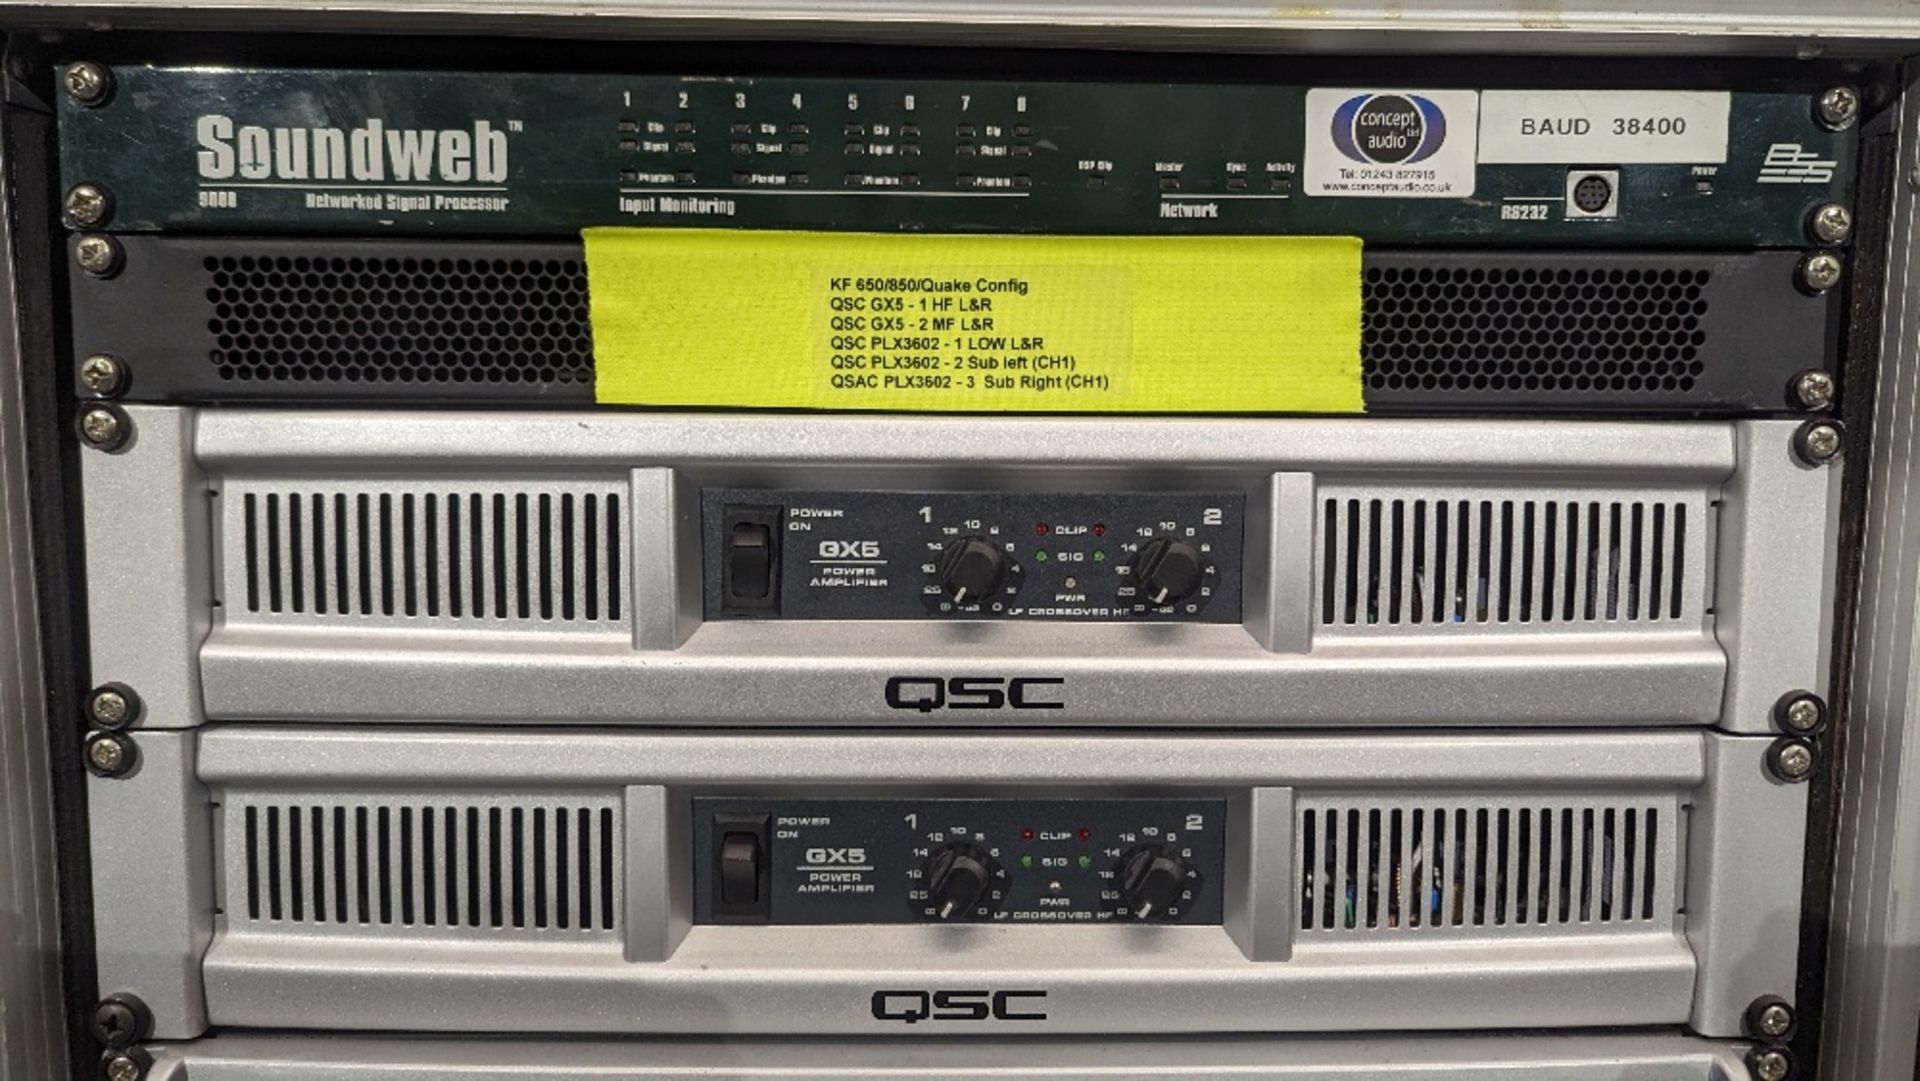 Amplifier Rack - To Include: (5) QSC Amplifiers & (1) BSS Soundweb 9088 Network Signal Processor - Image 3 of 7